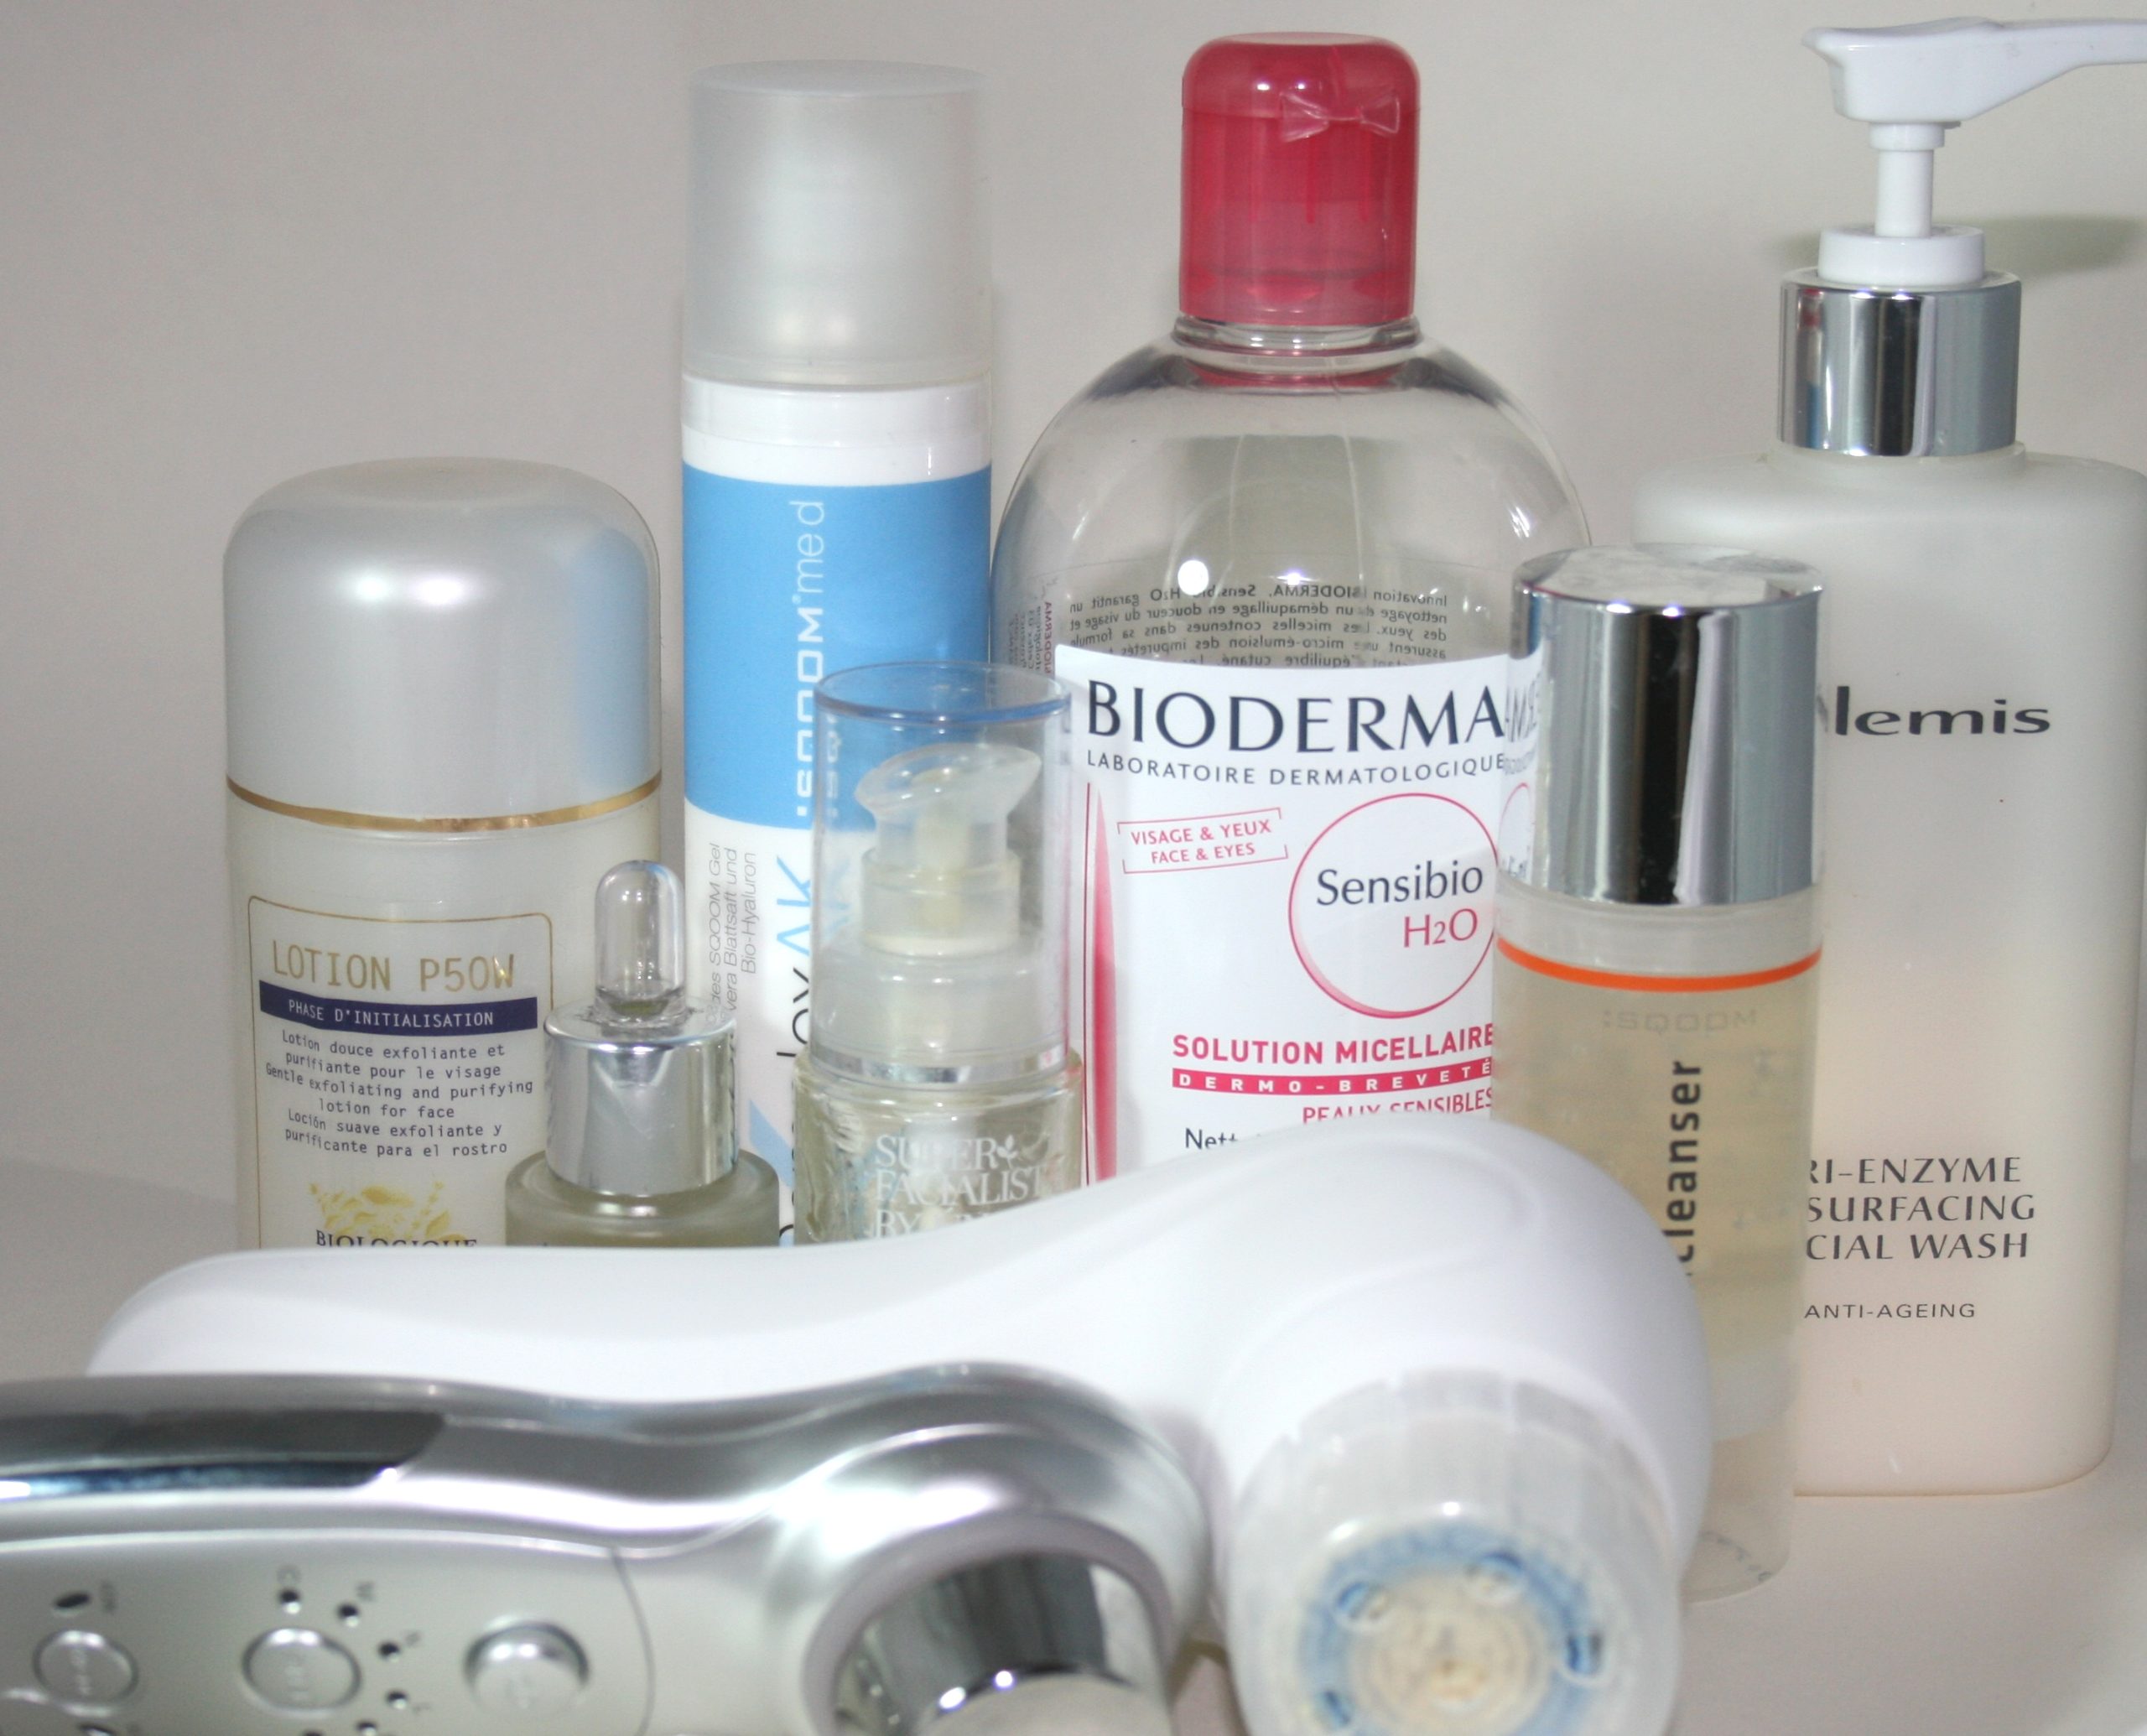 My Current Skincare Routine: April 2014